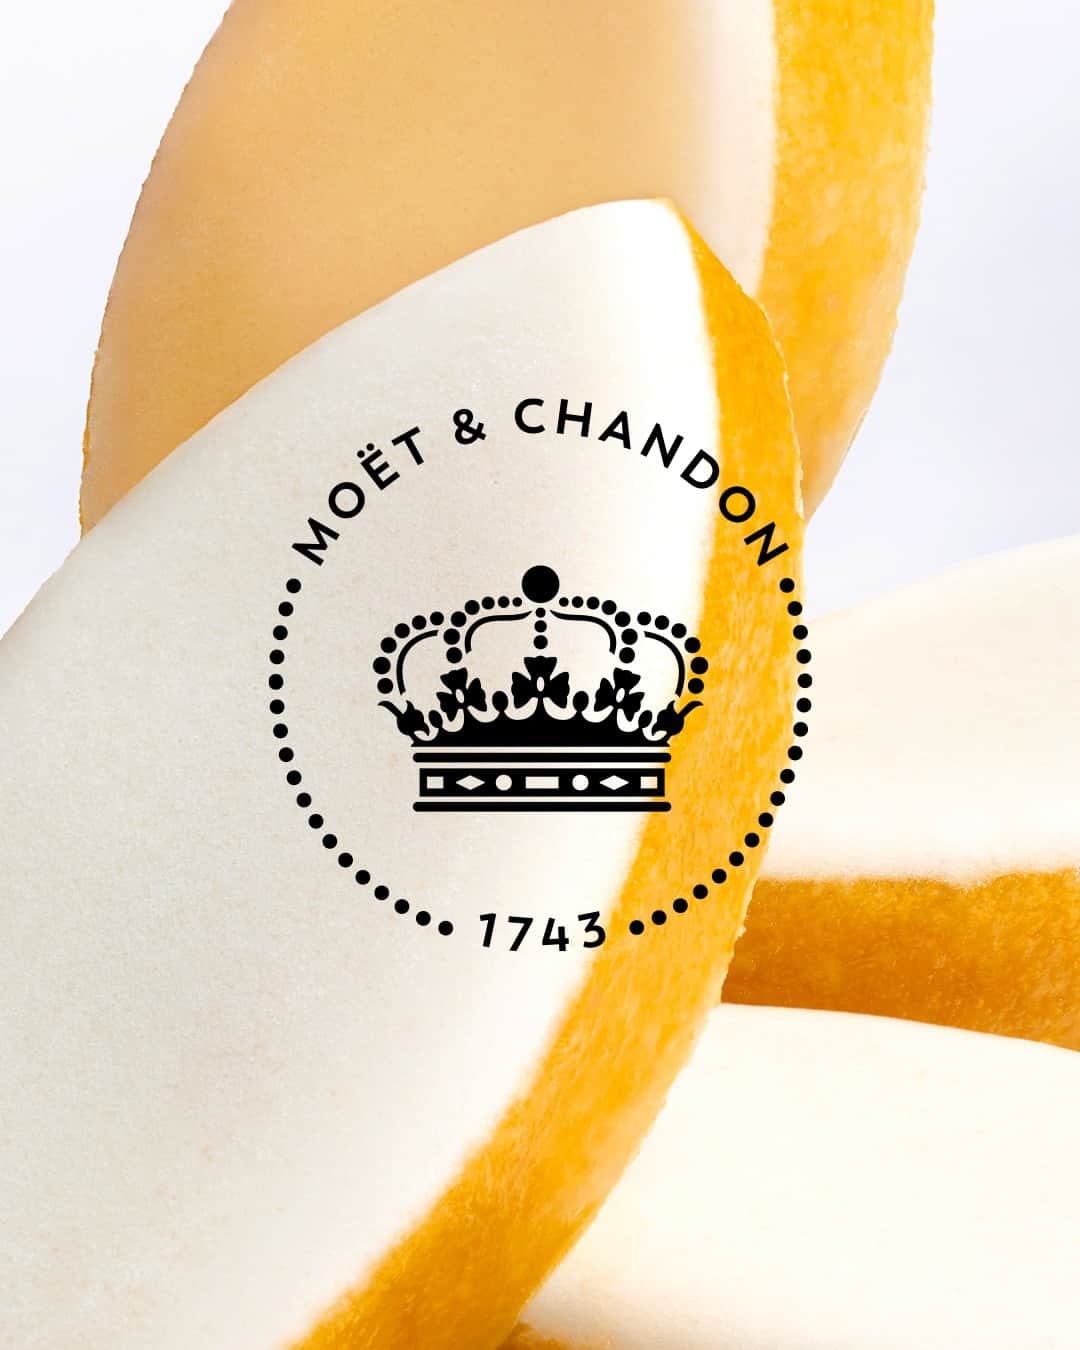 Moët & Chandon Officialのインスタグラム：「Nicknamed Luminous Morning, the freshness of Grand Vintage 2015 suggests a bright, radiant, almost blinding light amidst a delicate soft green botanical bouquet and various shades of white and yellow. Mirror this radiant glow in the custard yellow of a calisson using the principle of chromaticity.⁣ ⁣ #GrandVintage2015 #MoetChandon⁣ ⁣ This material is not intended to be viewed by persons under the legal alcohol drinking age or in countries with restrictions on advertising on alcoholic beverages. ENJOY MOËT RESPONSIBLY.」